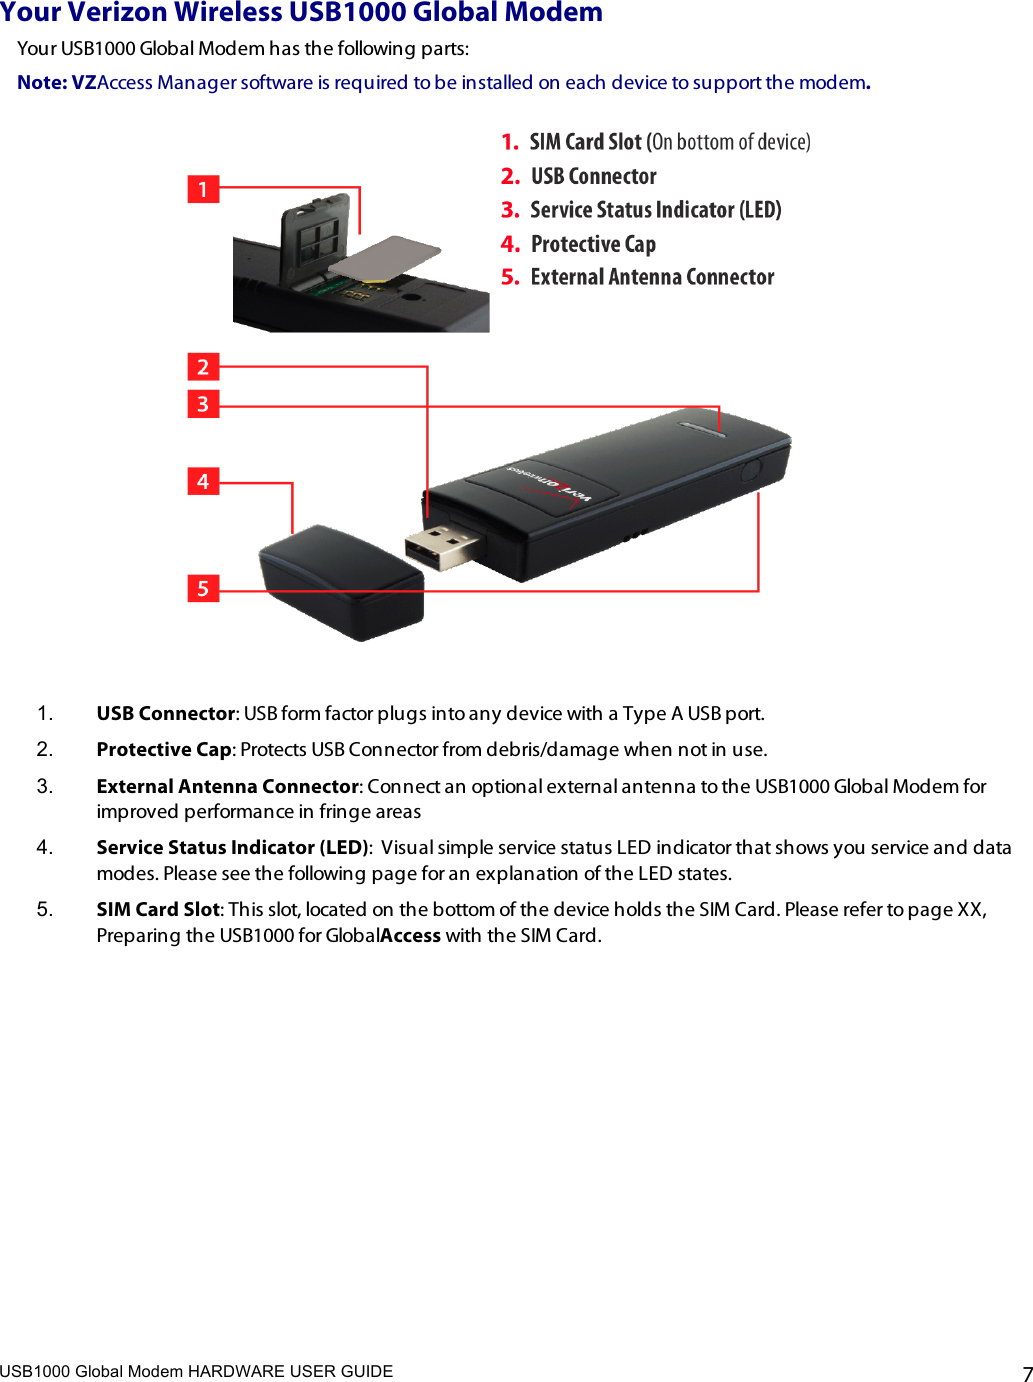 USB1000 Global Modem HARDWARE USER GUIDE    7 Your Verizon Wireless USB1000 Global Modem Your USB1000 Global Modem has the following parts:  Note: VZAccess Manager software is required to be installed on each device to support the modem.   1.  USB Connector: USB form factor plugs into any device with a Type A USB port. 2.  Protective Cap: Protects USB Connector from debris/damage when not in use.  3.  External Antenna Connector: Connect an optional external antenna to the USB1000 Global Modem for improved performance in fringe areas 4.  Service Status Indicator (LED):  Visual simple service status LED indicator that shows you service and data modes. Please see the following page for an explanation of the LED states. 5.  SIM Card Slot: This slot, located on the bottom of the device holds the SIM Card. Please refer to page XX, Preparing the USB1000 for GlobalAccess with the SIM Card.            